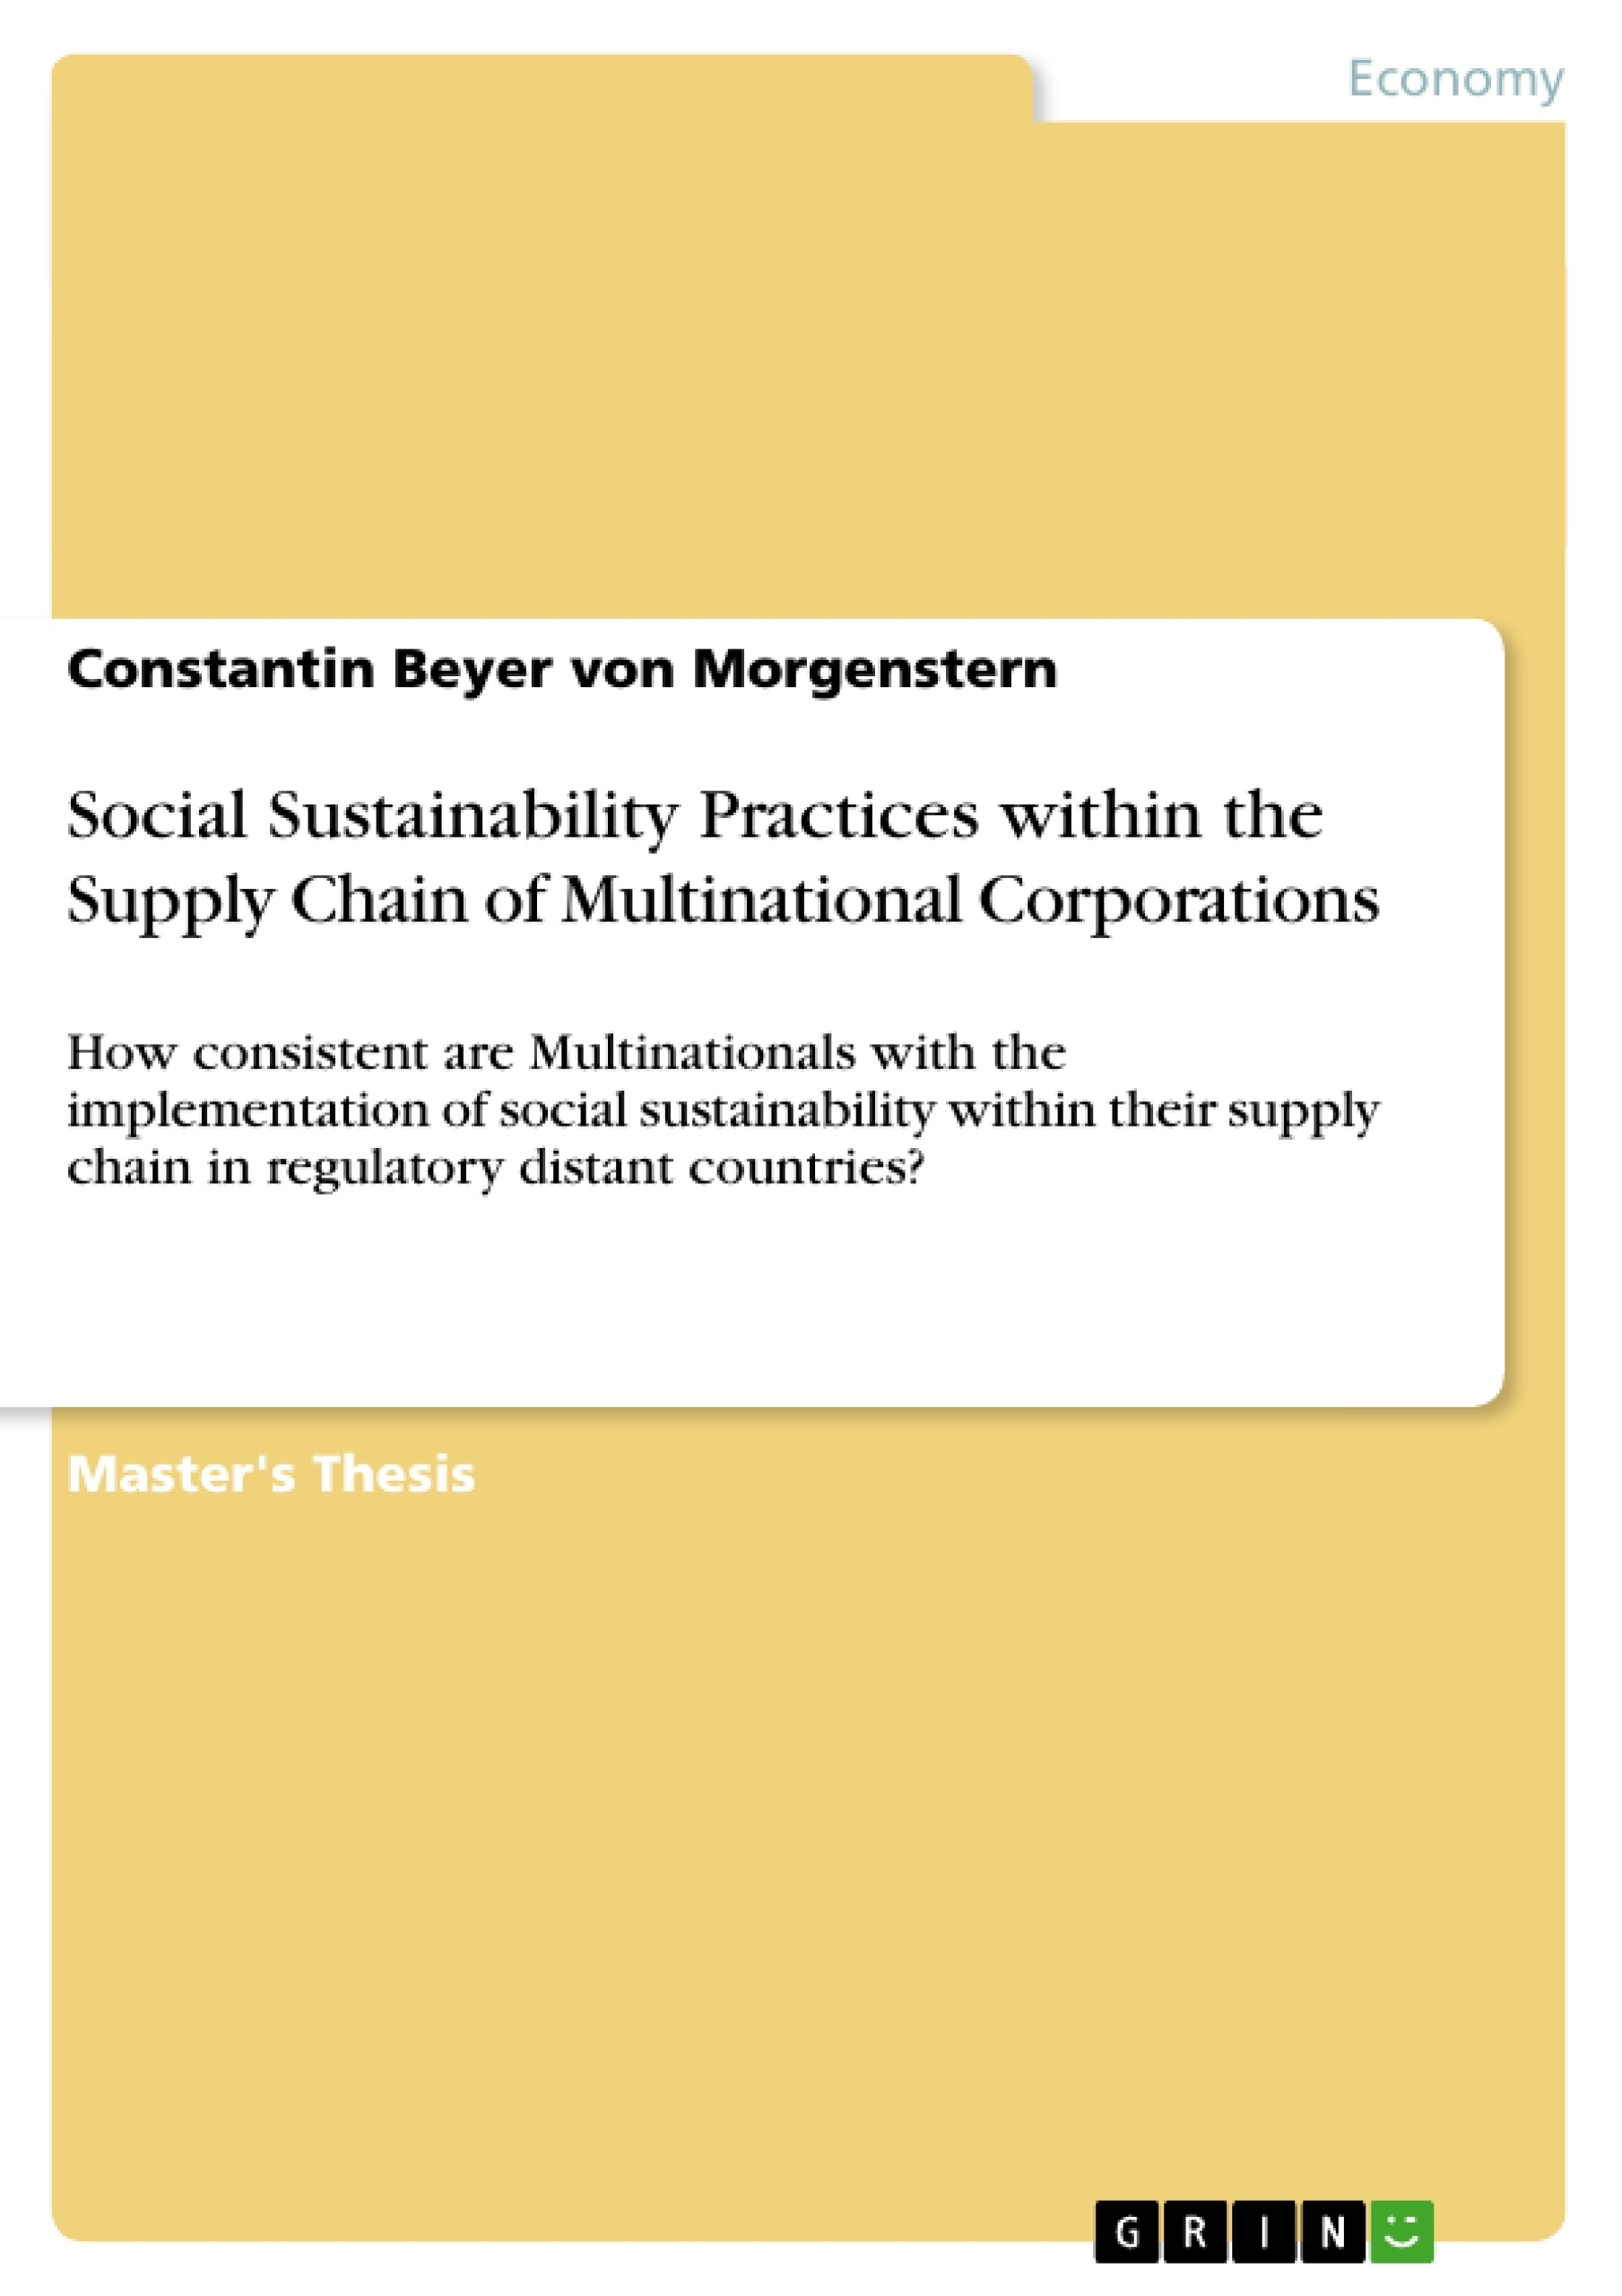 Título: Social Sustainability Practices within the Supply Chain of Multinational Corporations